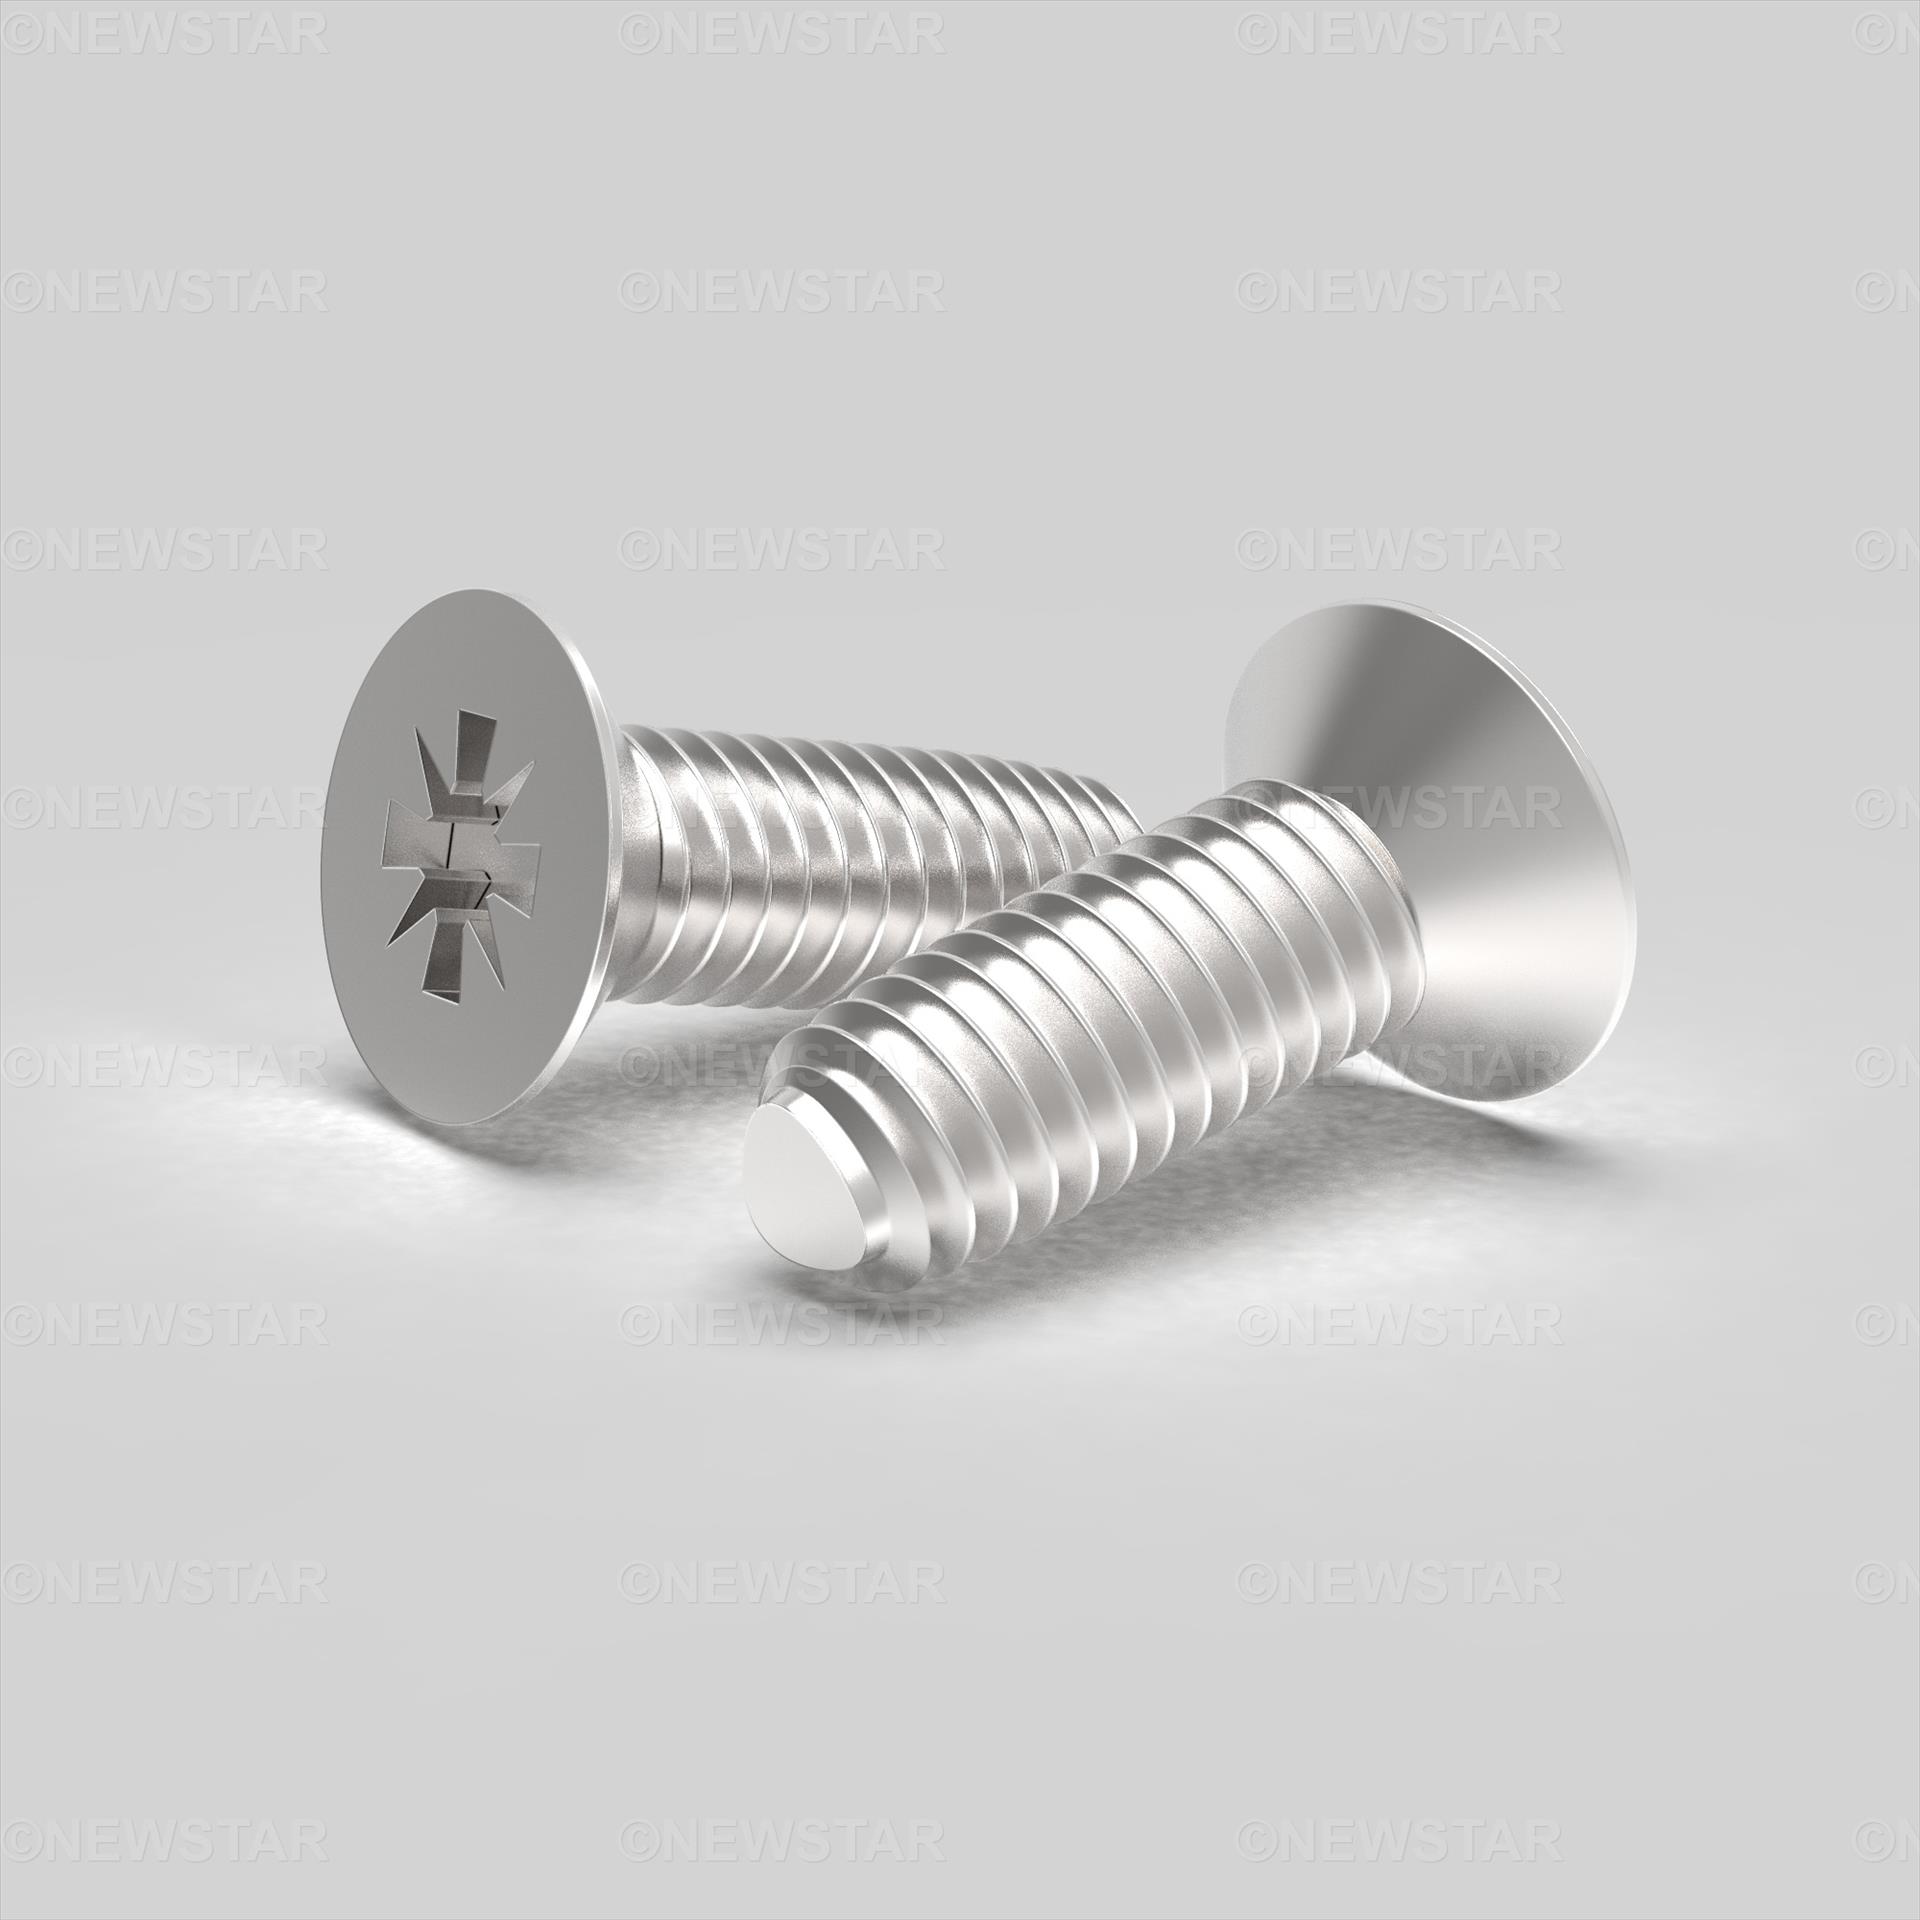 M2.5 X 5 Countersunk Pozi Thread Forming Screw DIN7500M A2 Stainless Steel